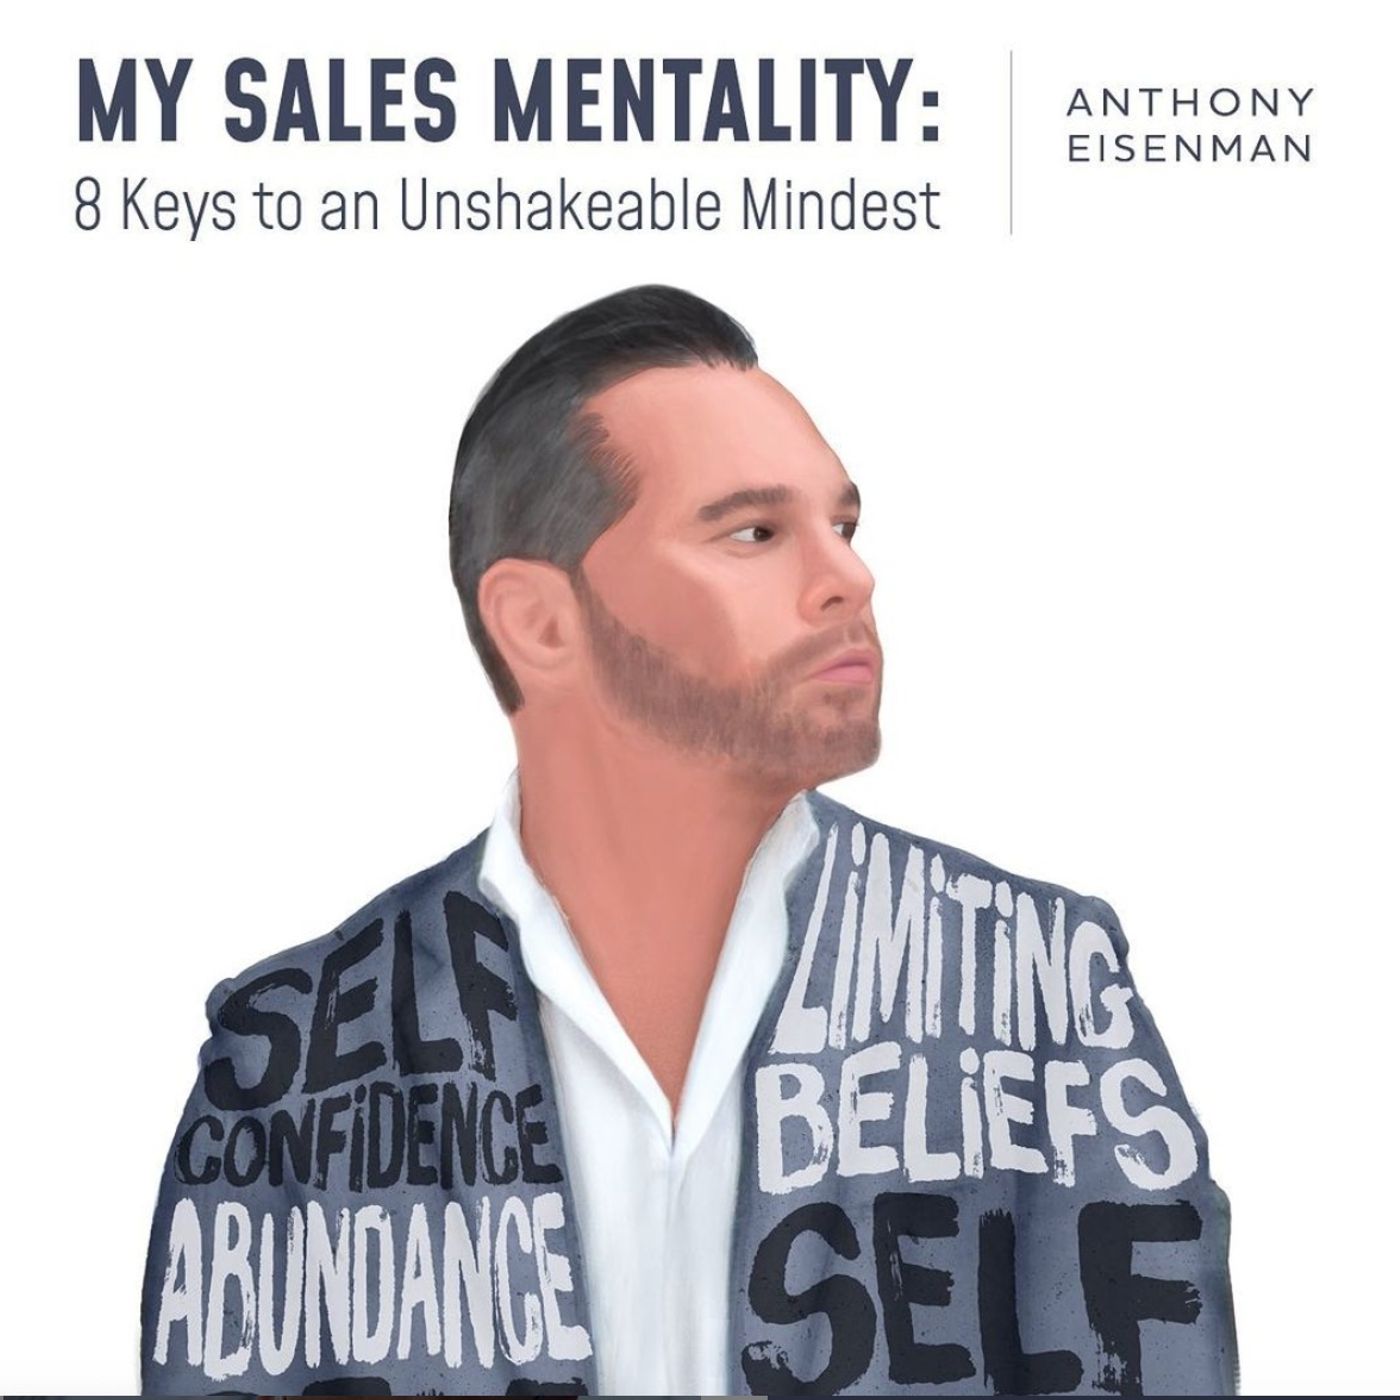 120. Selling knives door-to-door to working with Fortune 50 brands | Anthony Eisenman Image